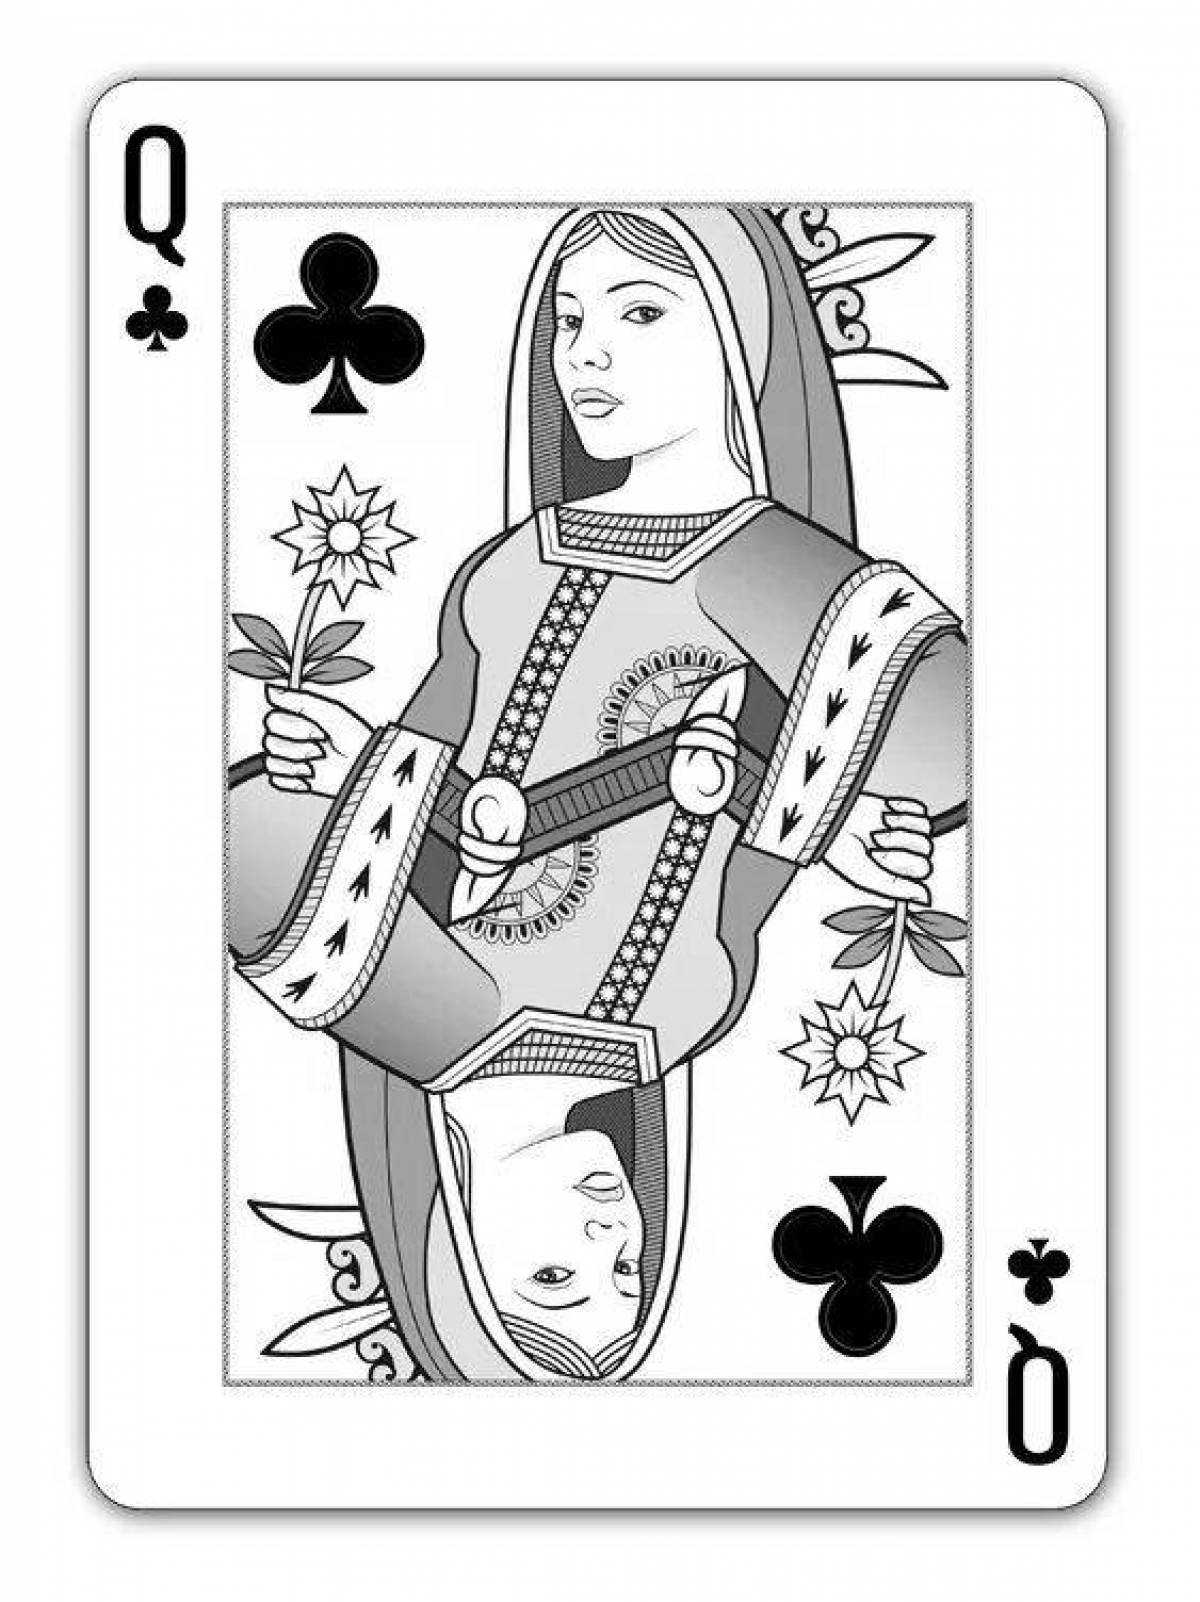 Playing cards #9